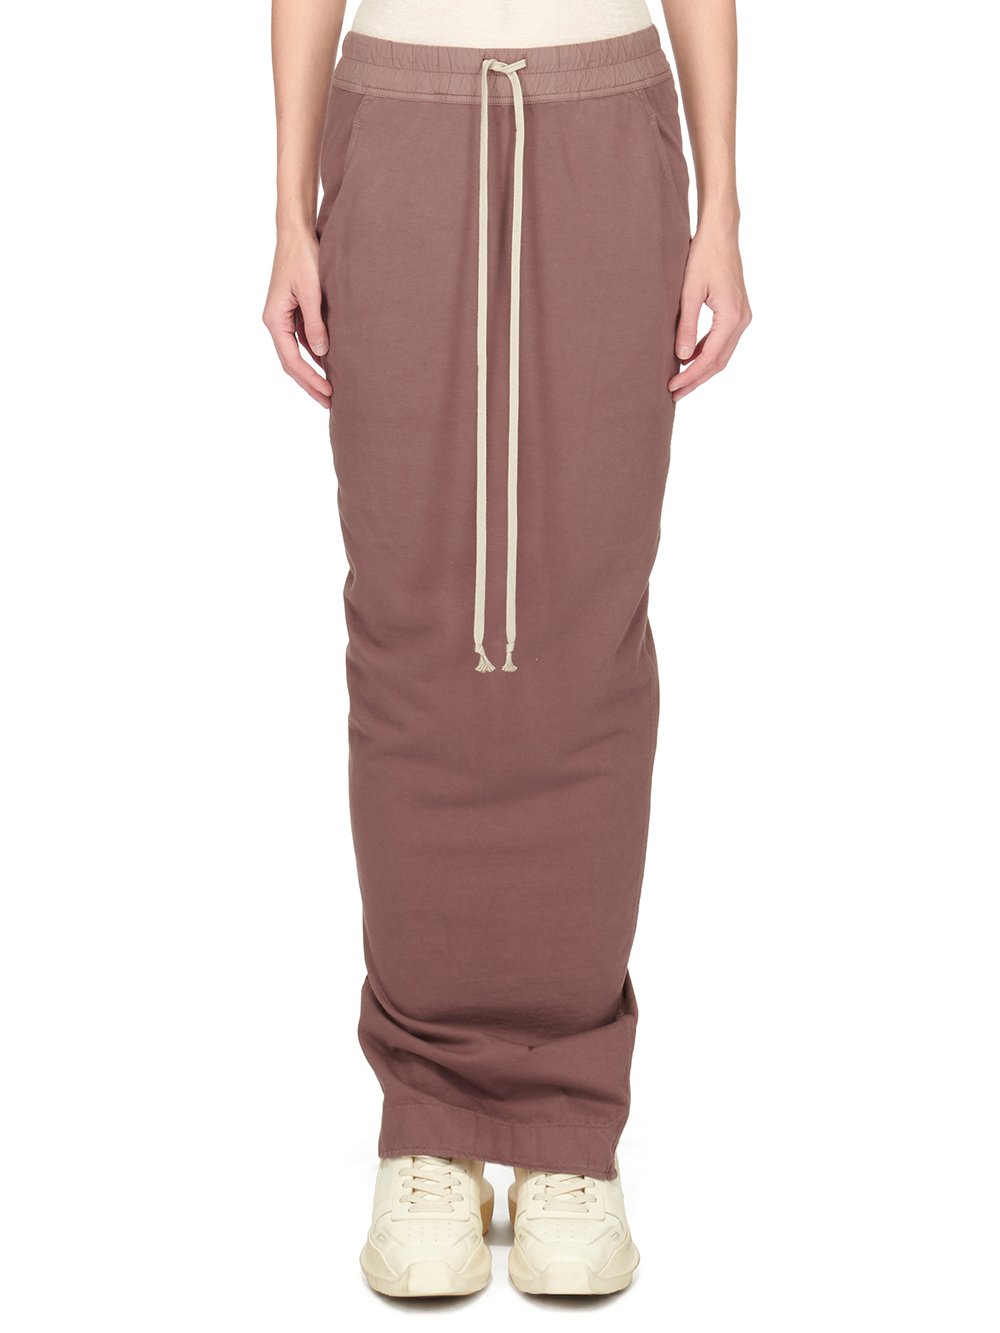 RICK OWENS FW23 LUXOR PULL ON PILLAR SKIRT IN MAUVE COMPACT HEAVY COTTON JERSEY